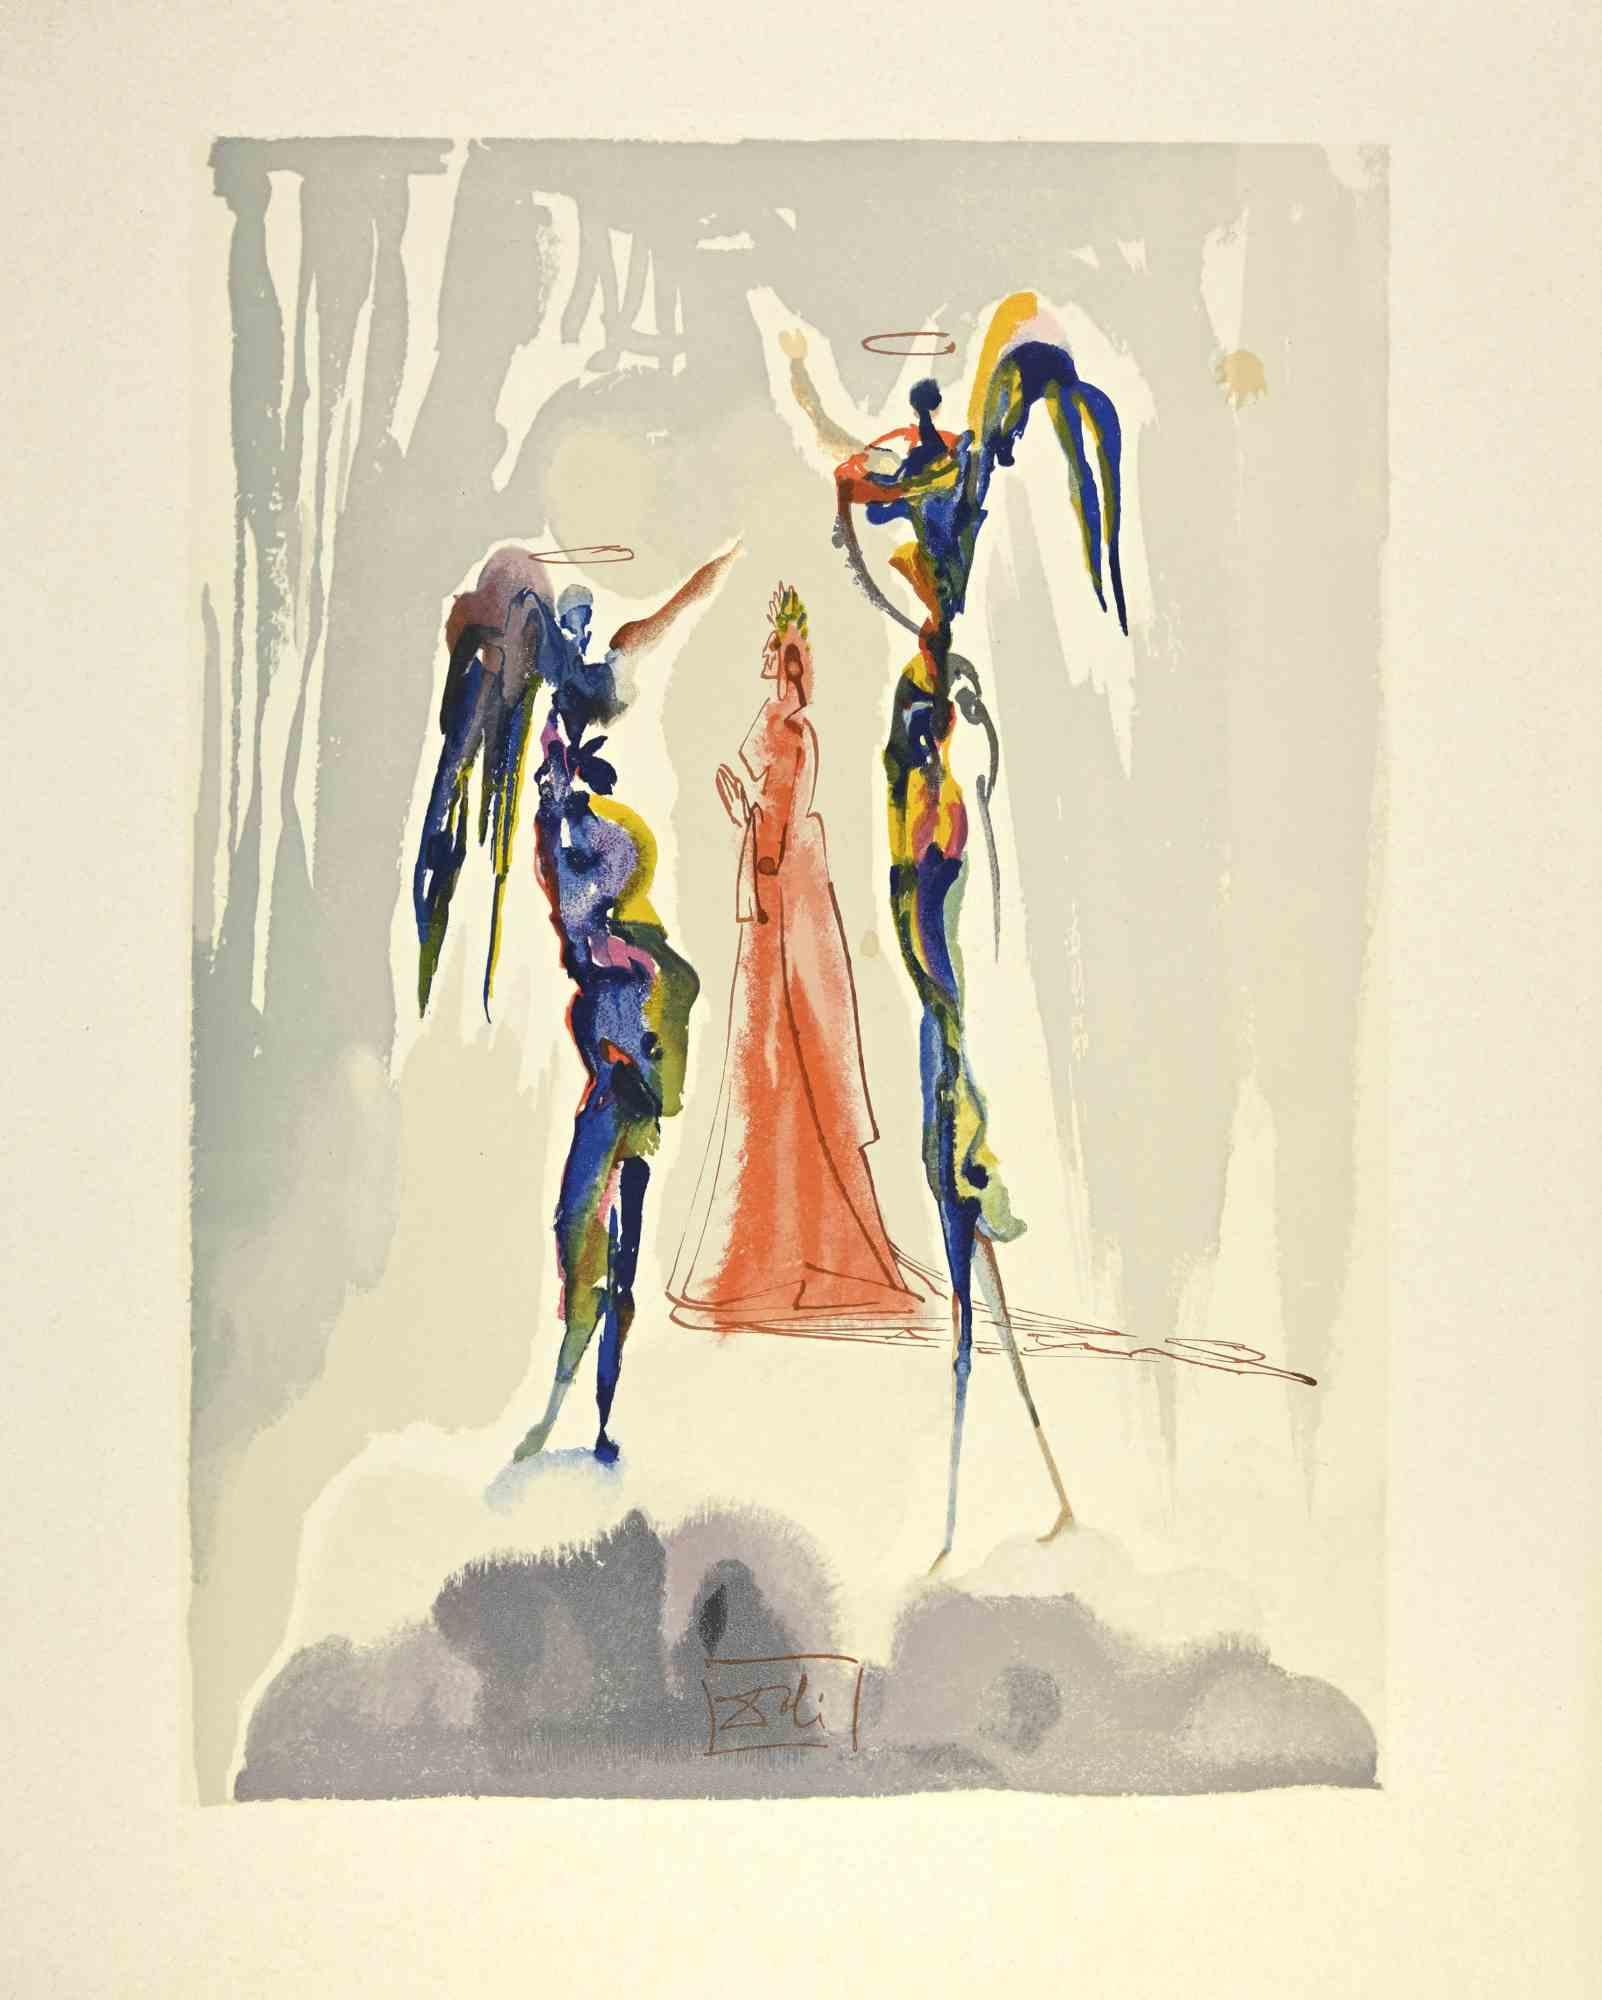 Salvador Dalí Figurative Print - The Angelus of the Empyrean - Woodcut - 1963